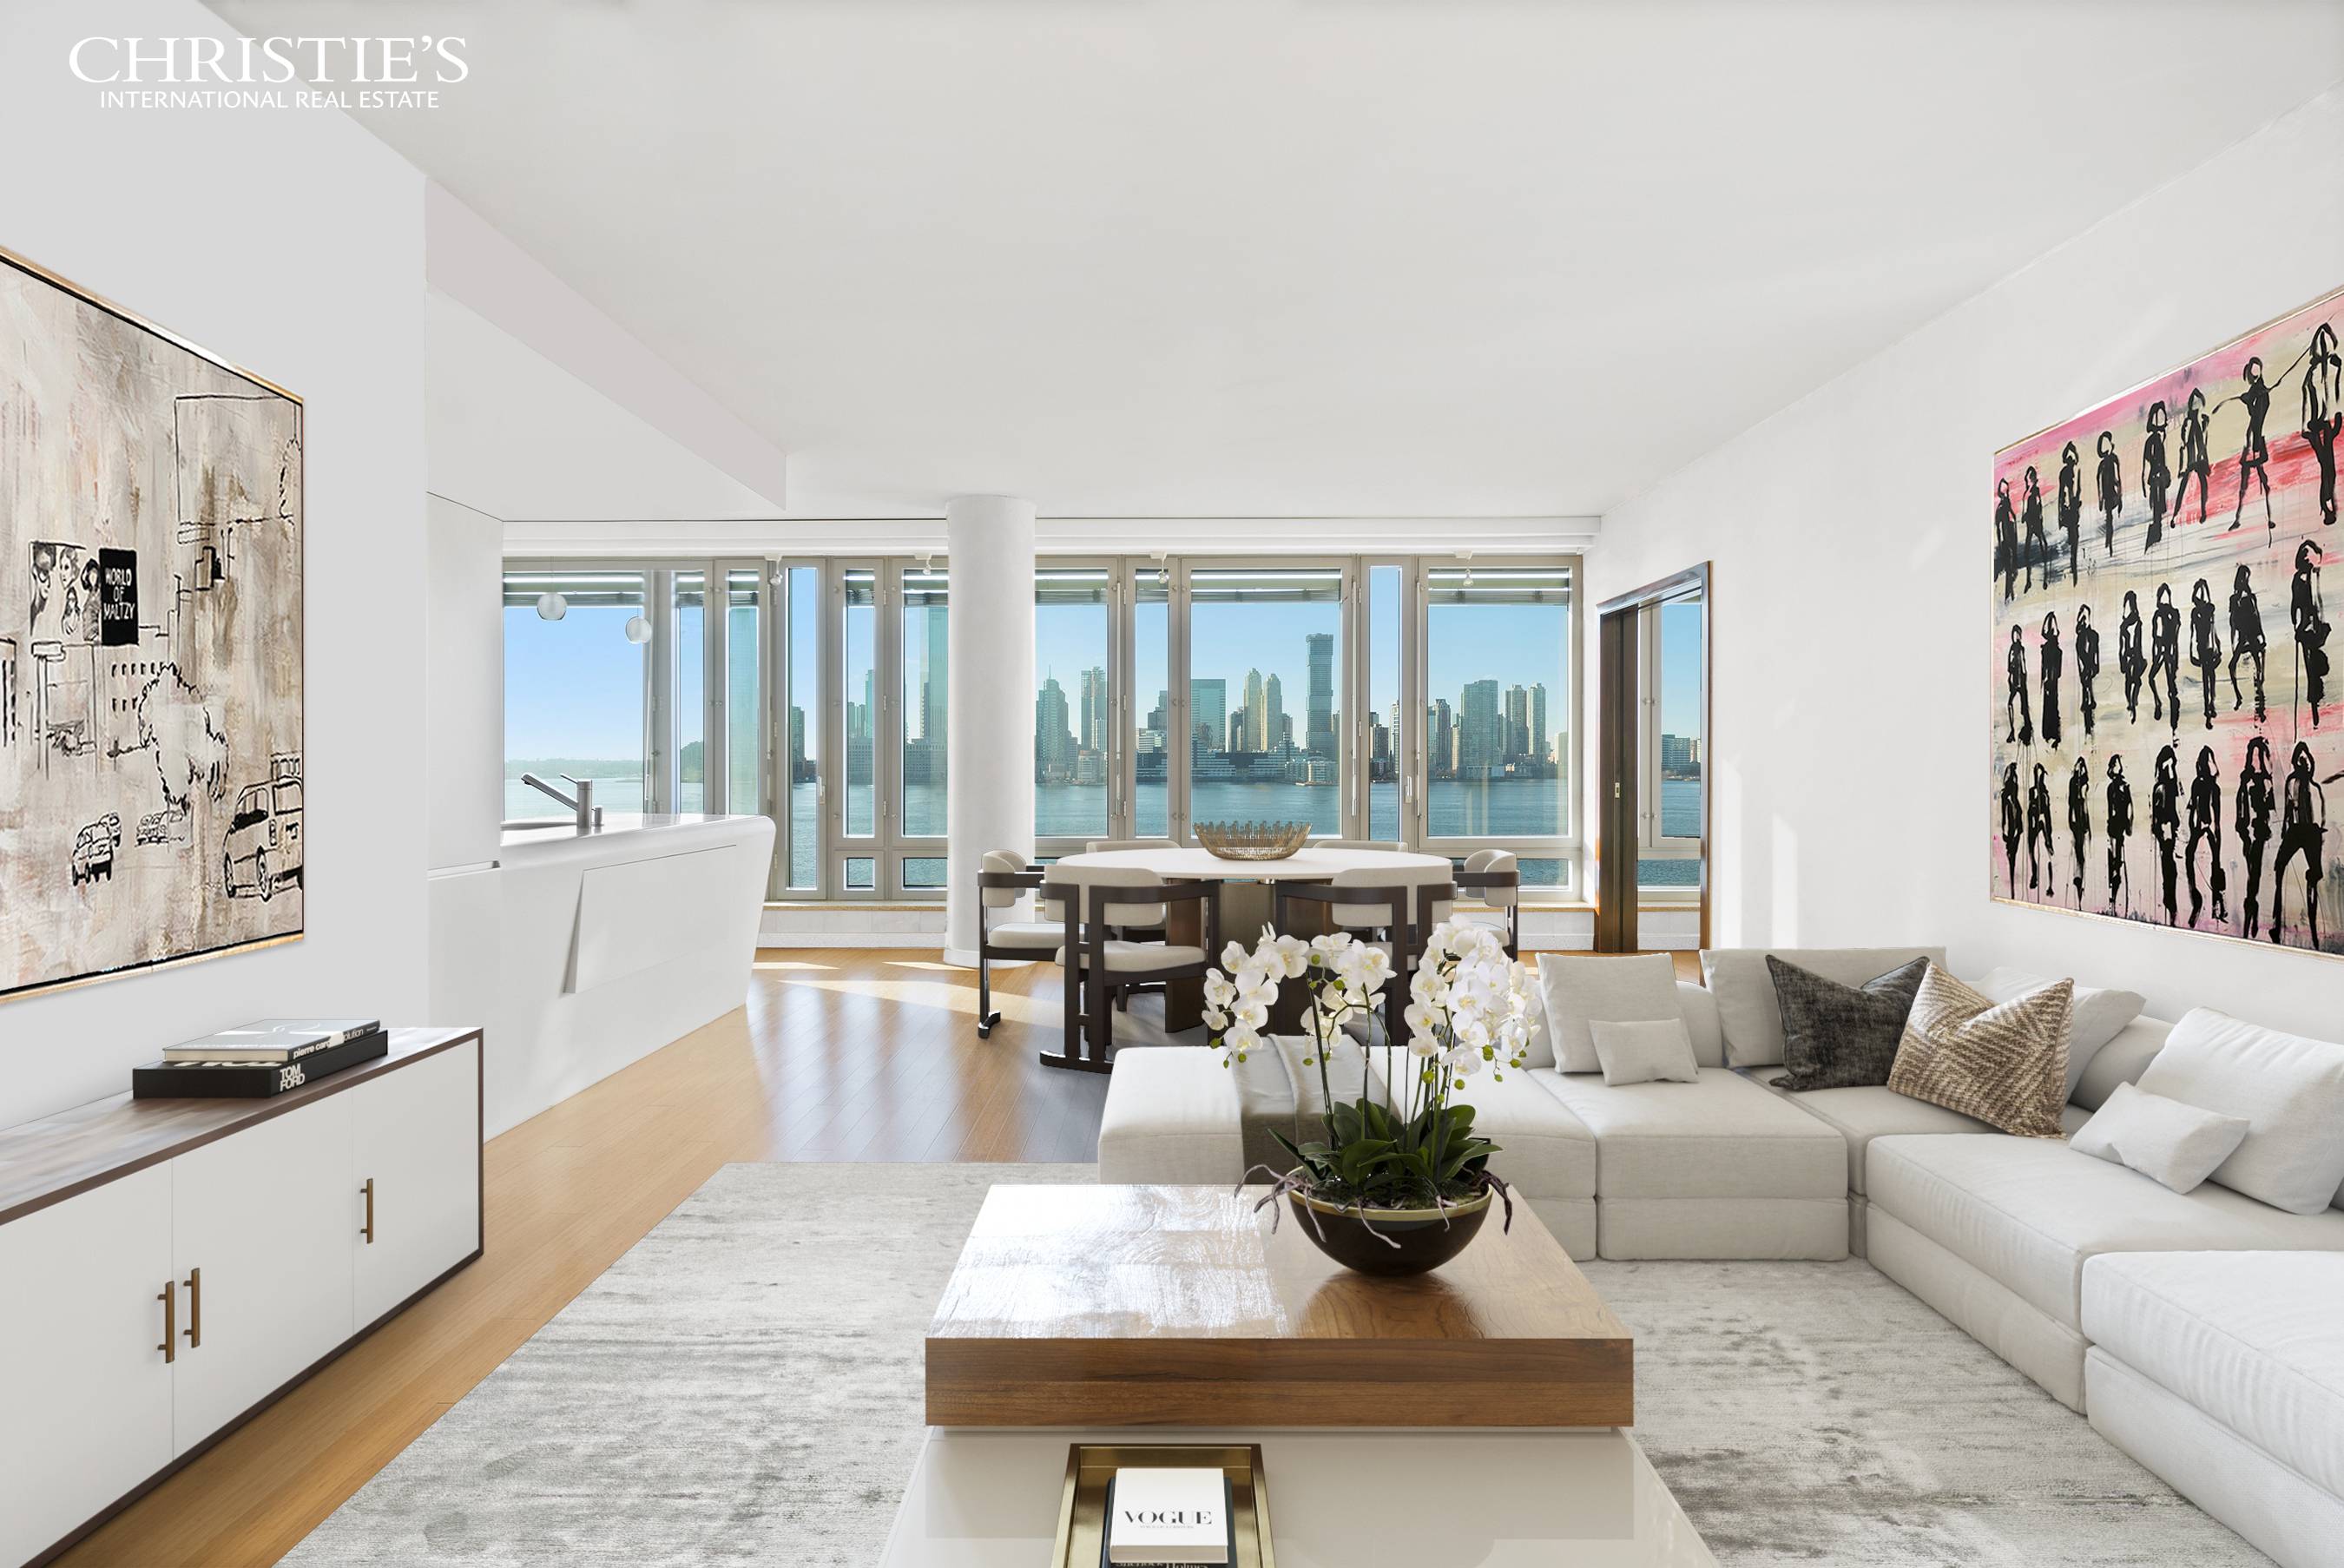 Apartment 7s is a luxury water front apartment in the West Tower of the Riverhouse.